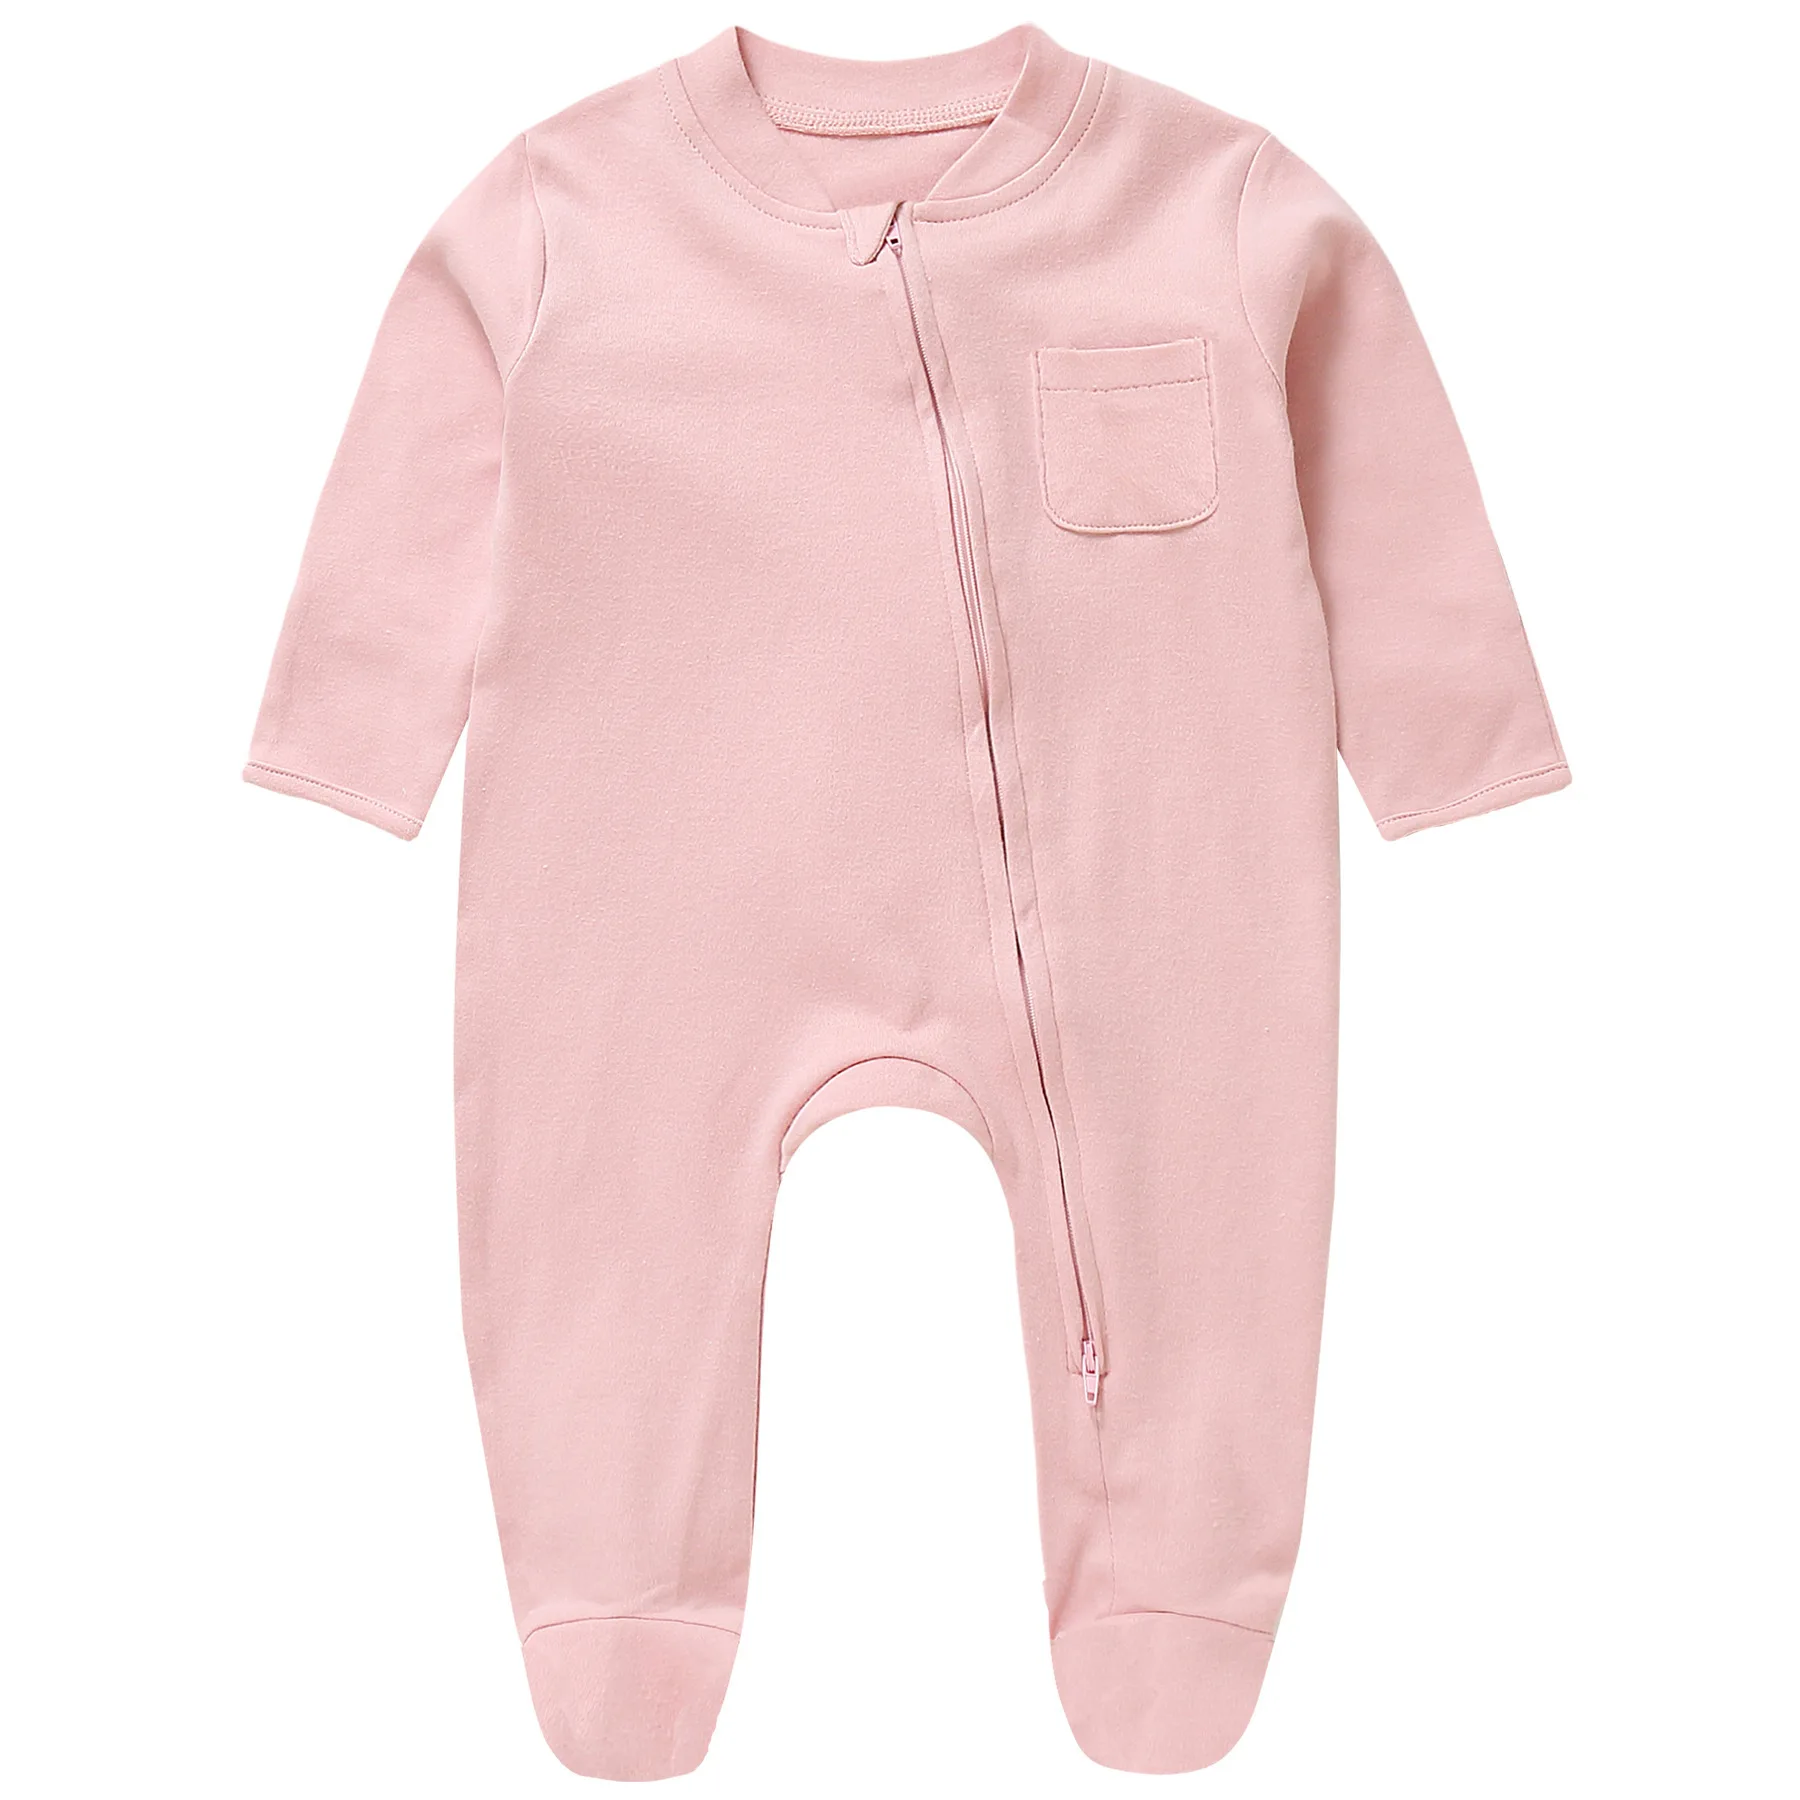 

6 colors blue pink grey yellow gray blank baby clothing cute long sleeve bebes bebi jumpsuit baby cotton romper, Navy, white, green, yellow, pink, blue